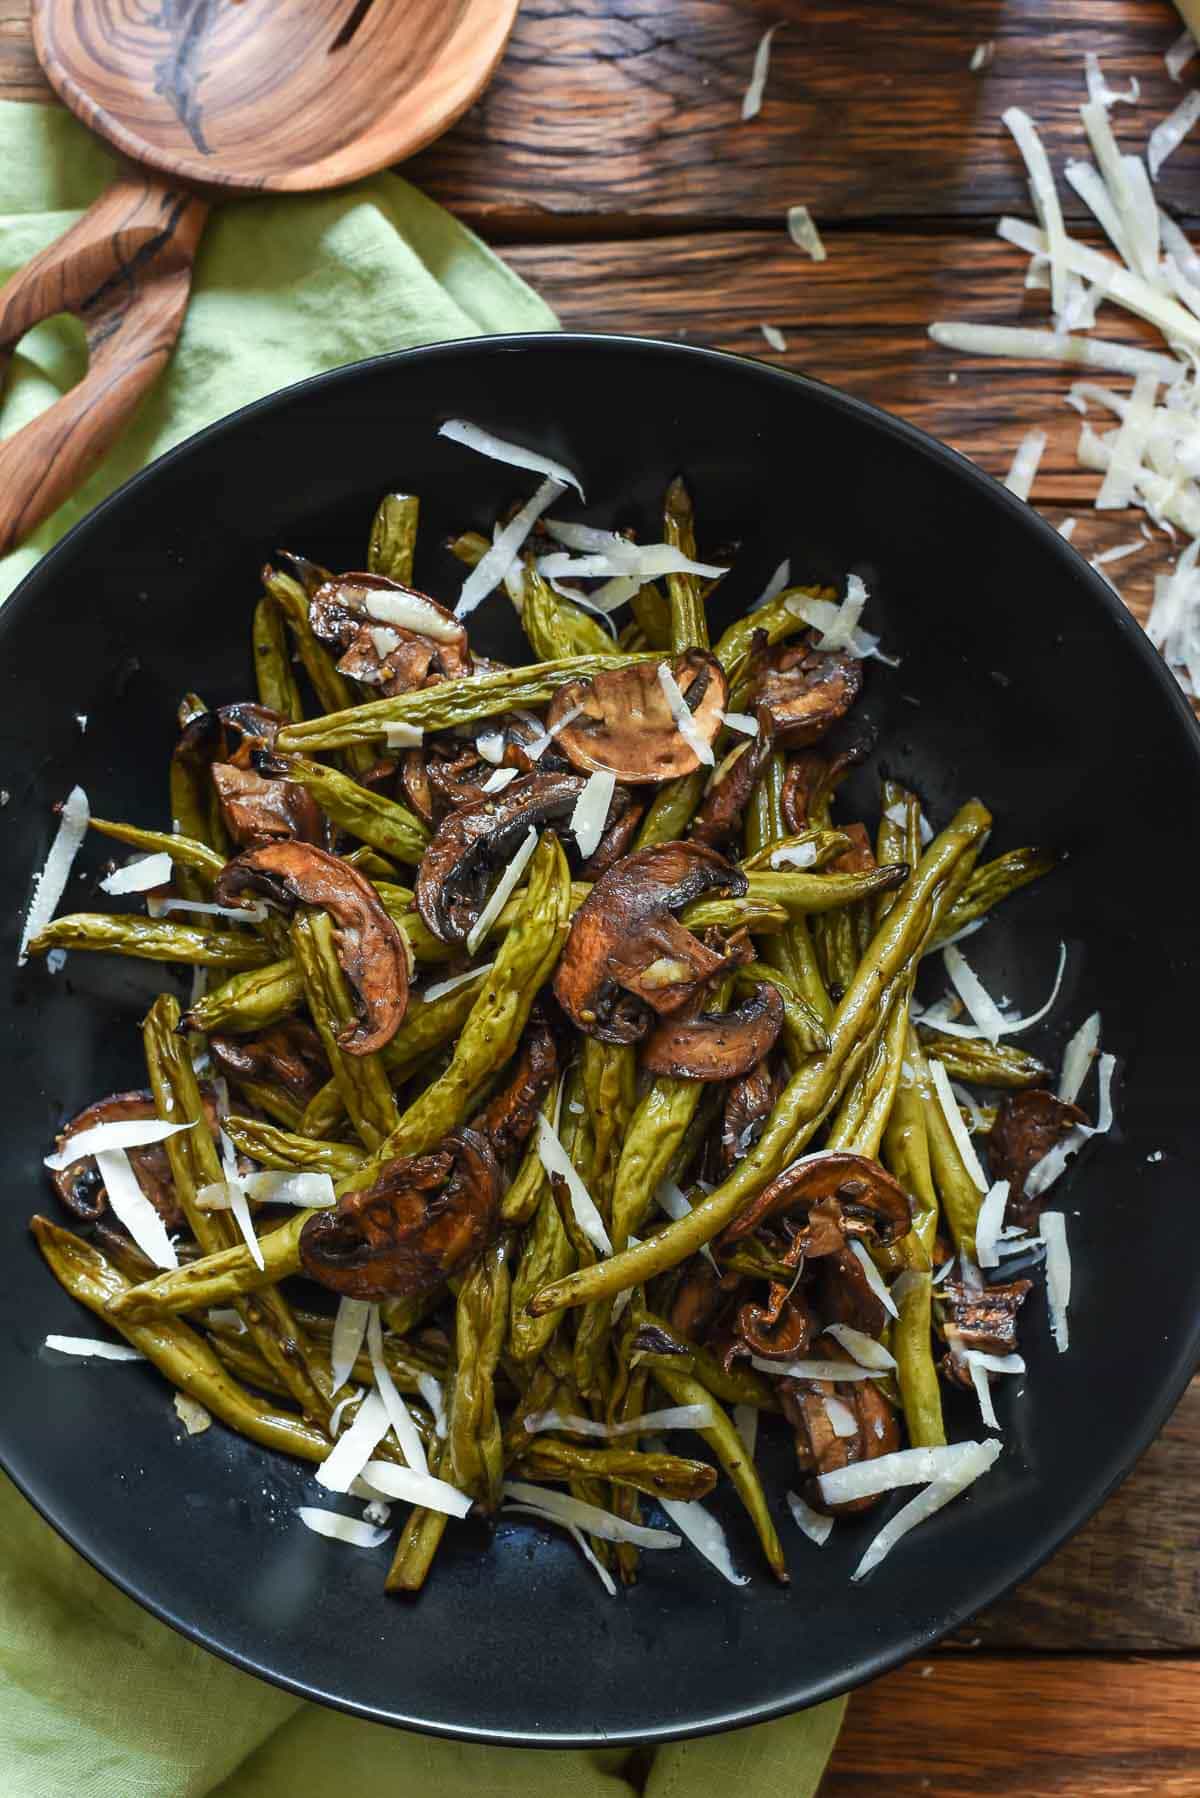 These Balsamic Roasted Green Beans and Mushrooms are a great easy side dish with tons of flavor!